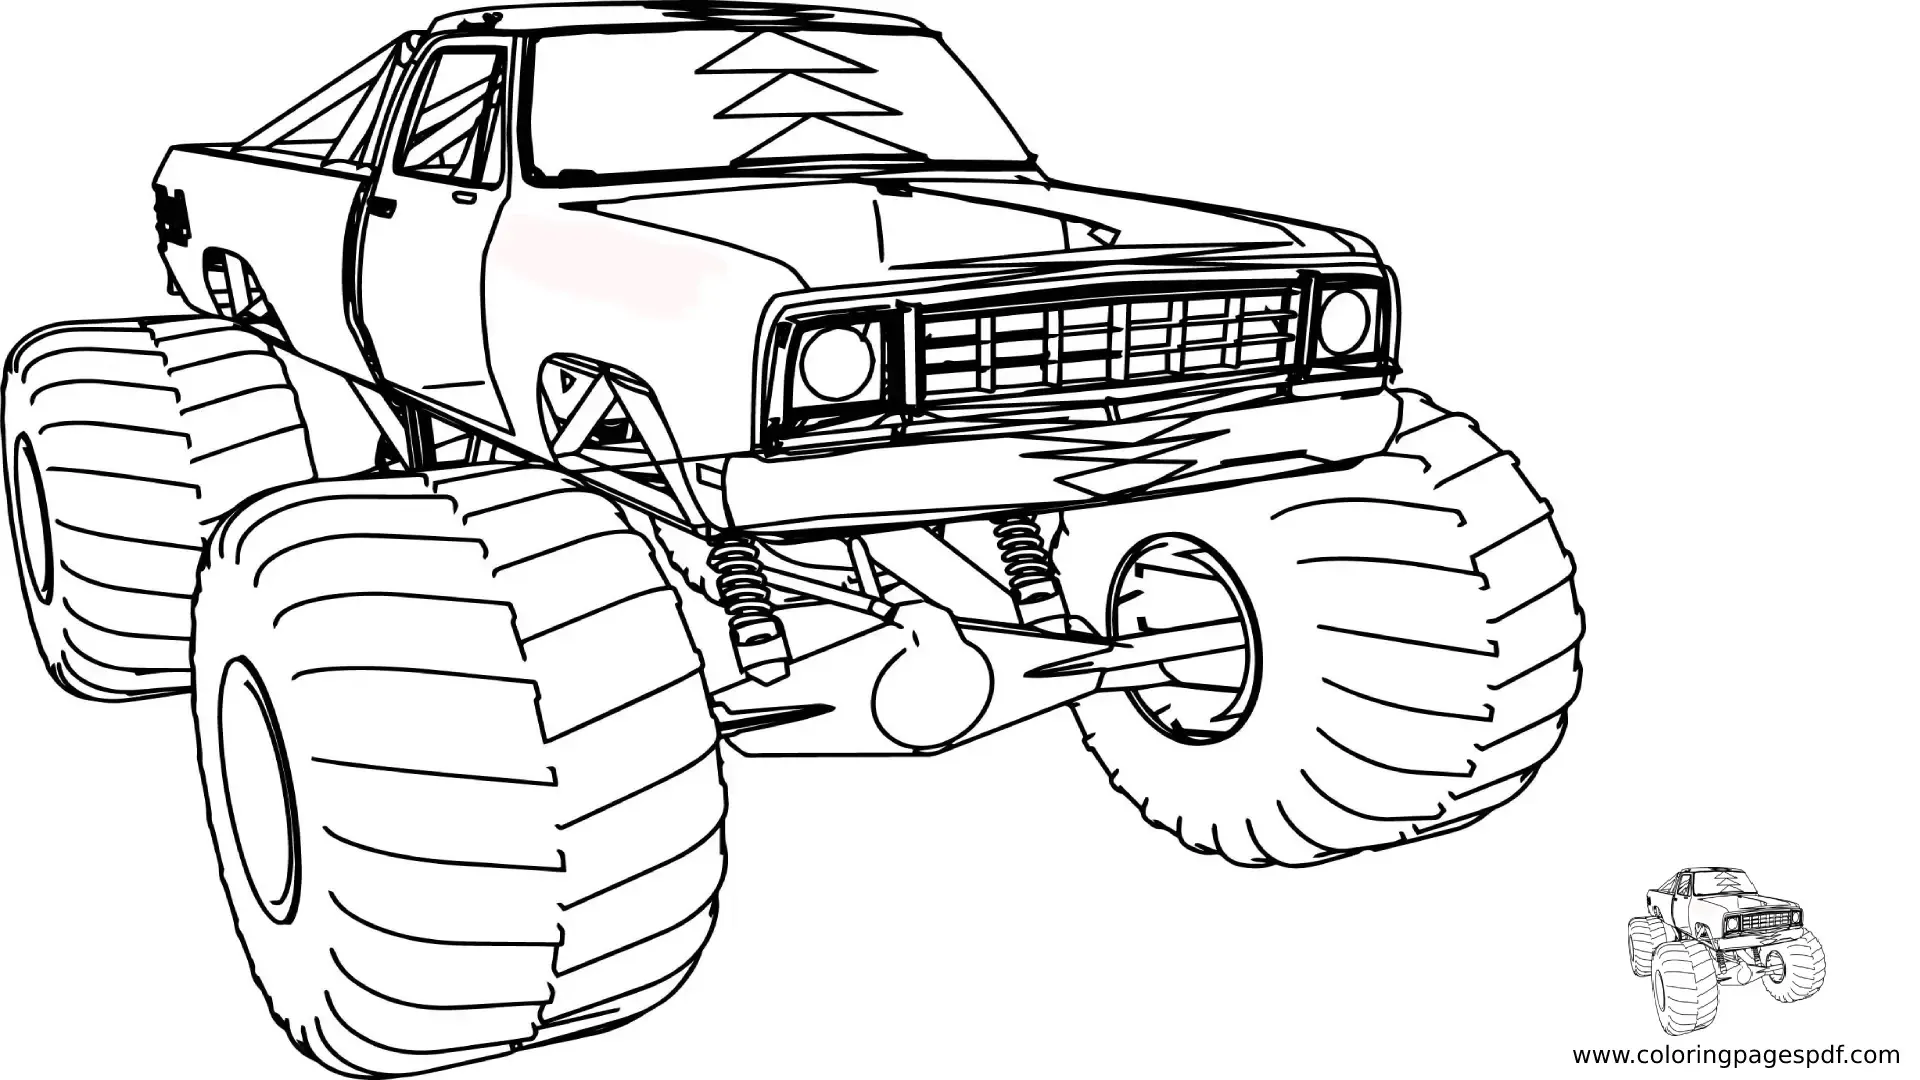 Coloring Pages Of A Monster Truck With Arrows